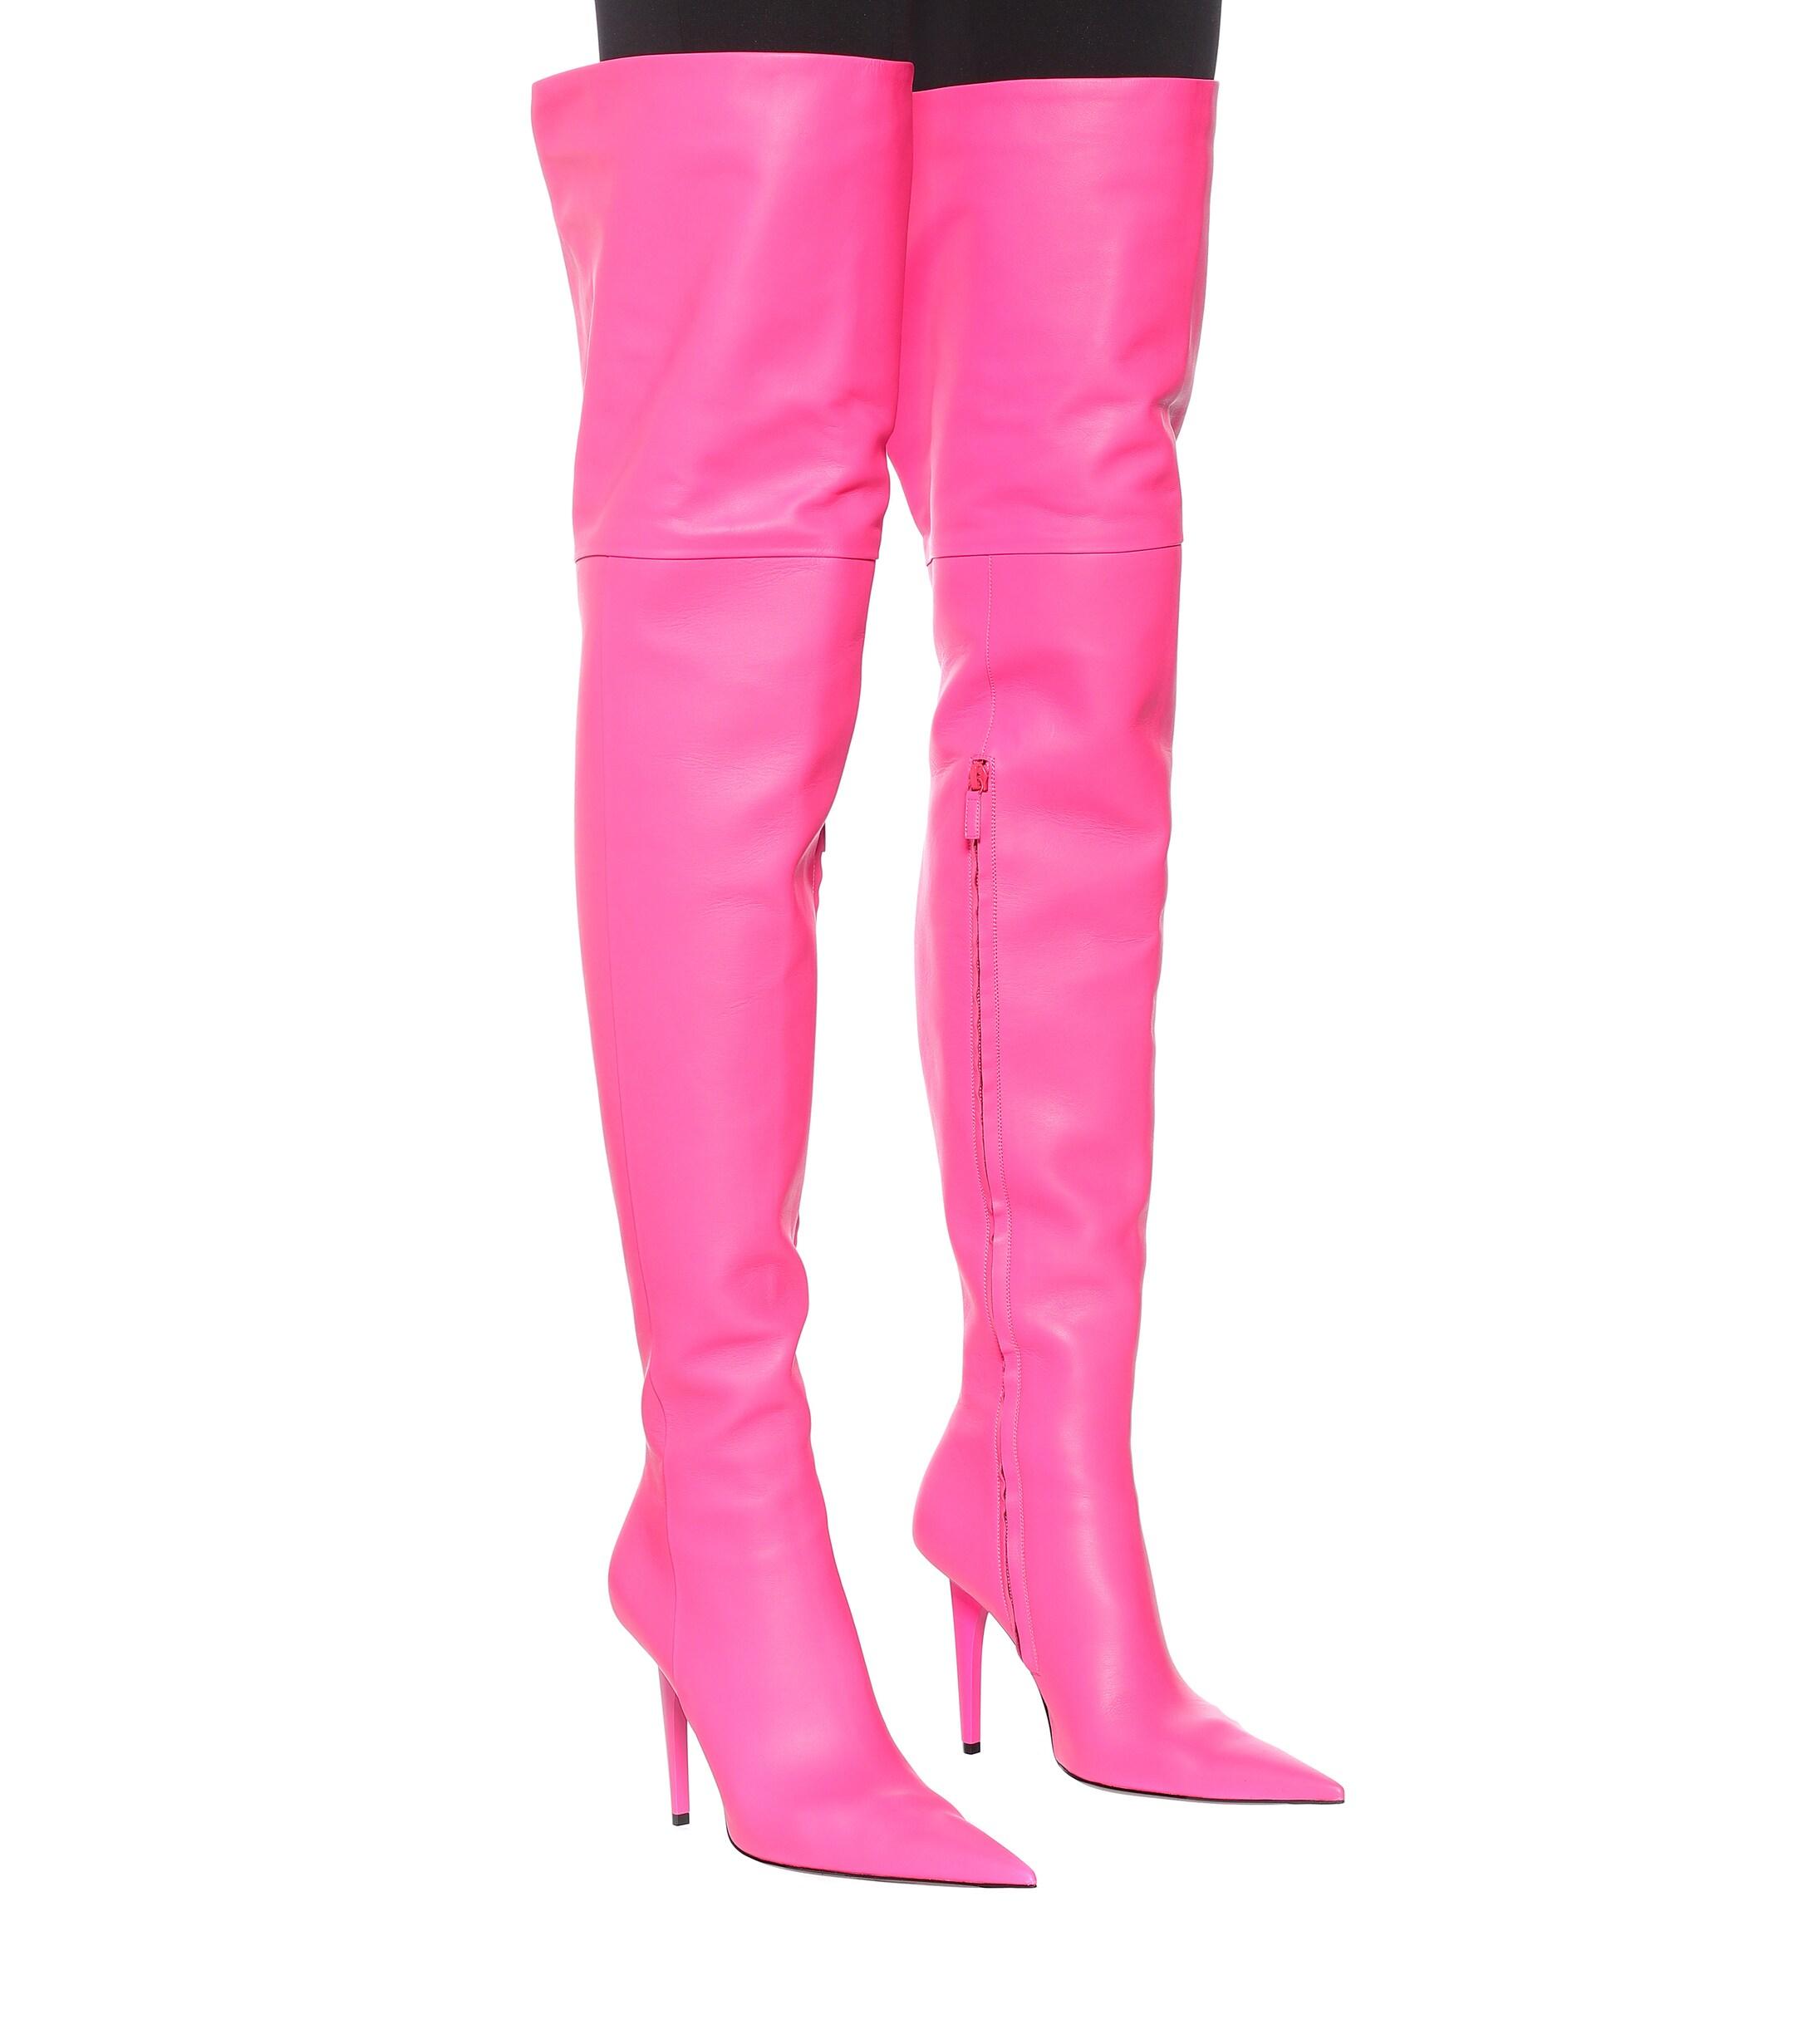 Balenciaga Knife Shark Leather Over-the-knee Boots in Pink | Lyst